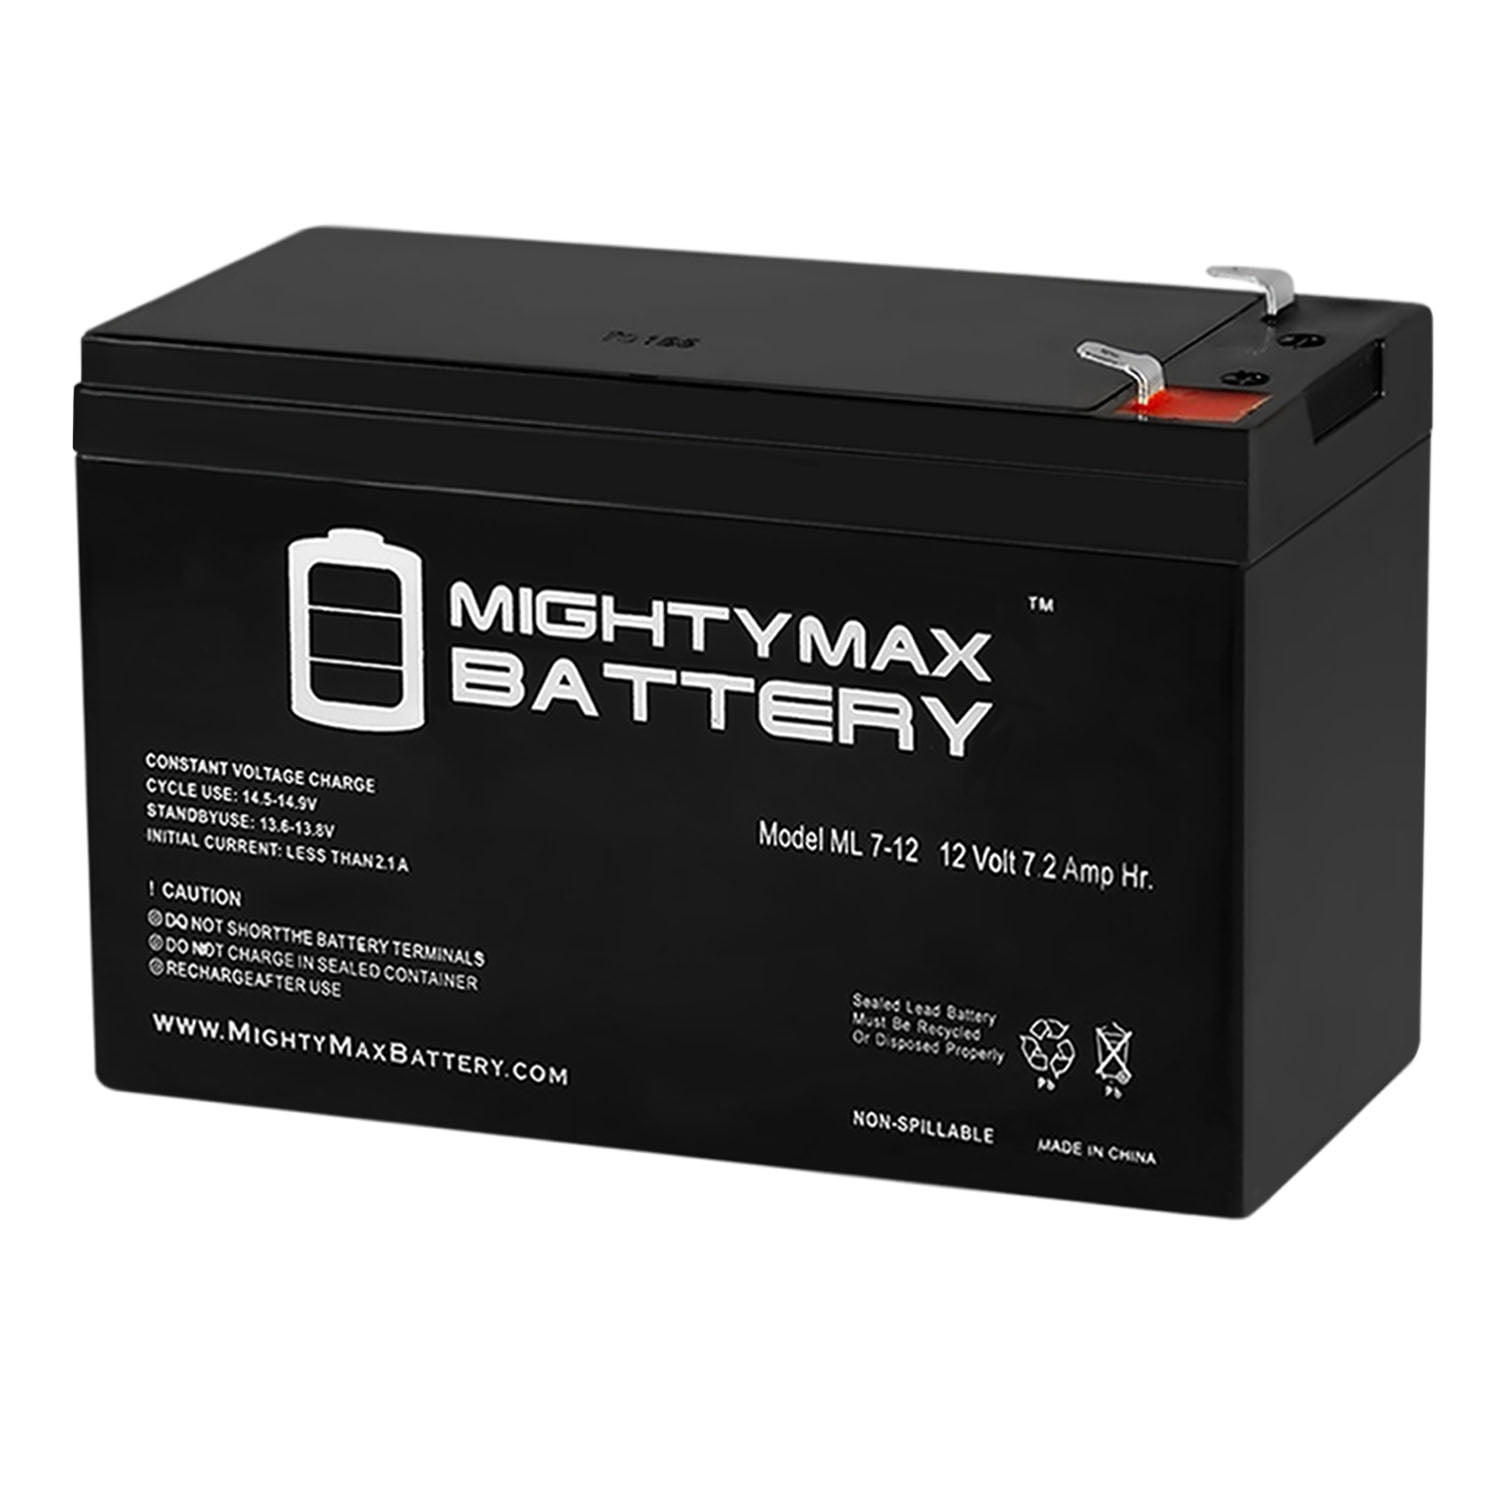 Mighty Max Battery 12V 7.2AH Razor Ground Force Drifter Go Kart Scooter Battery Replacement Brand Product 